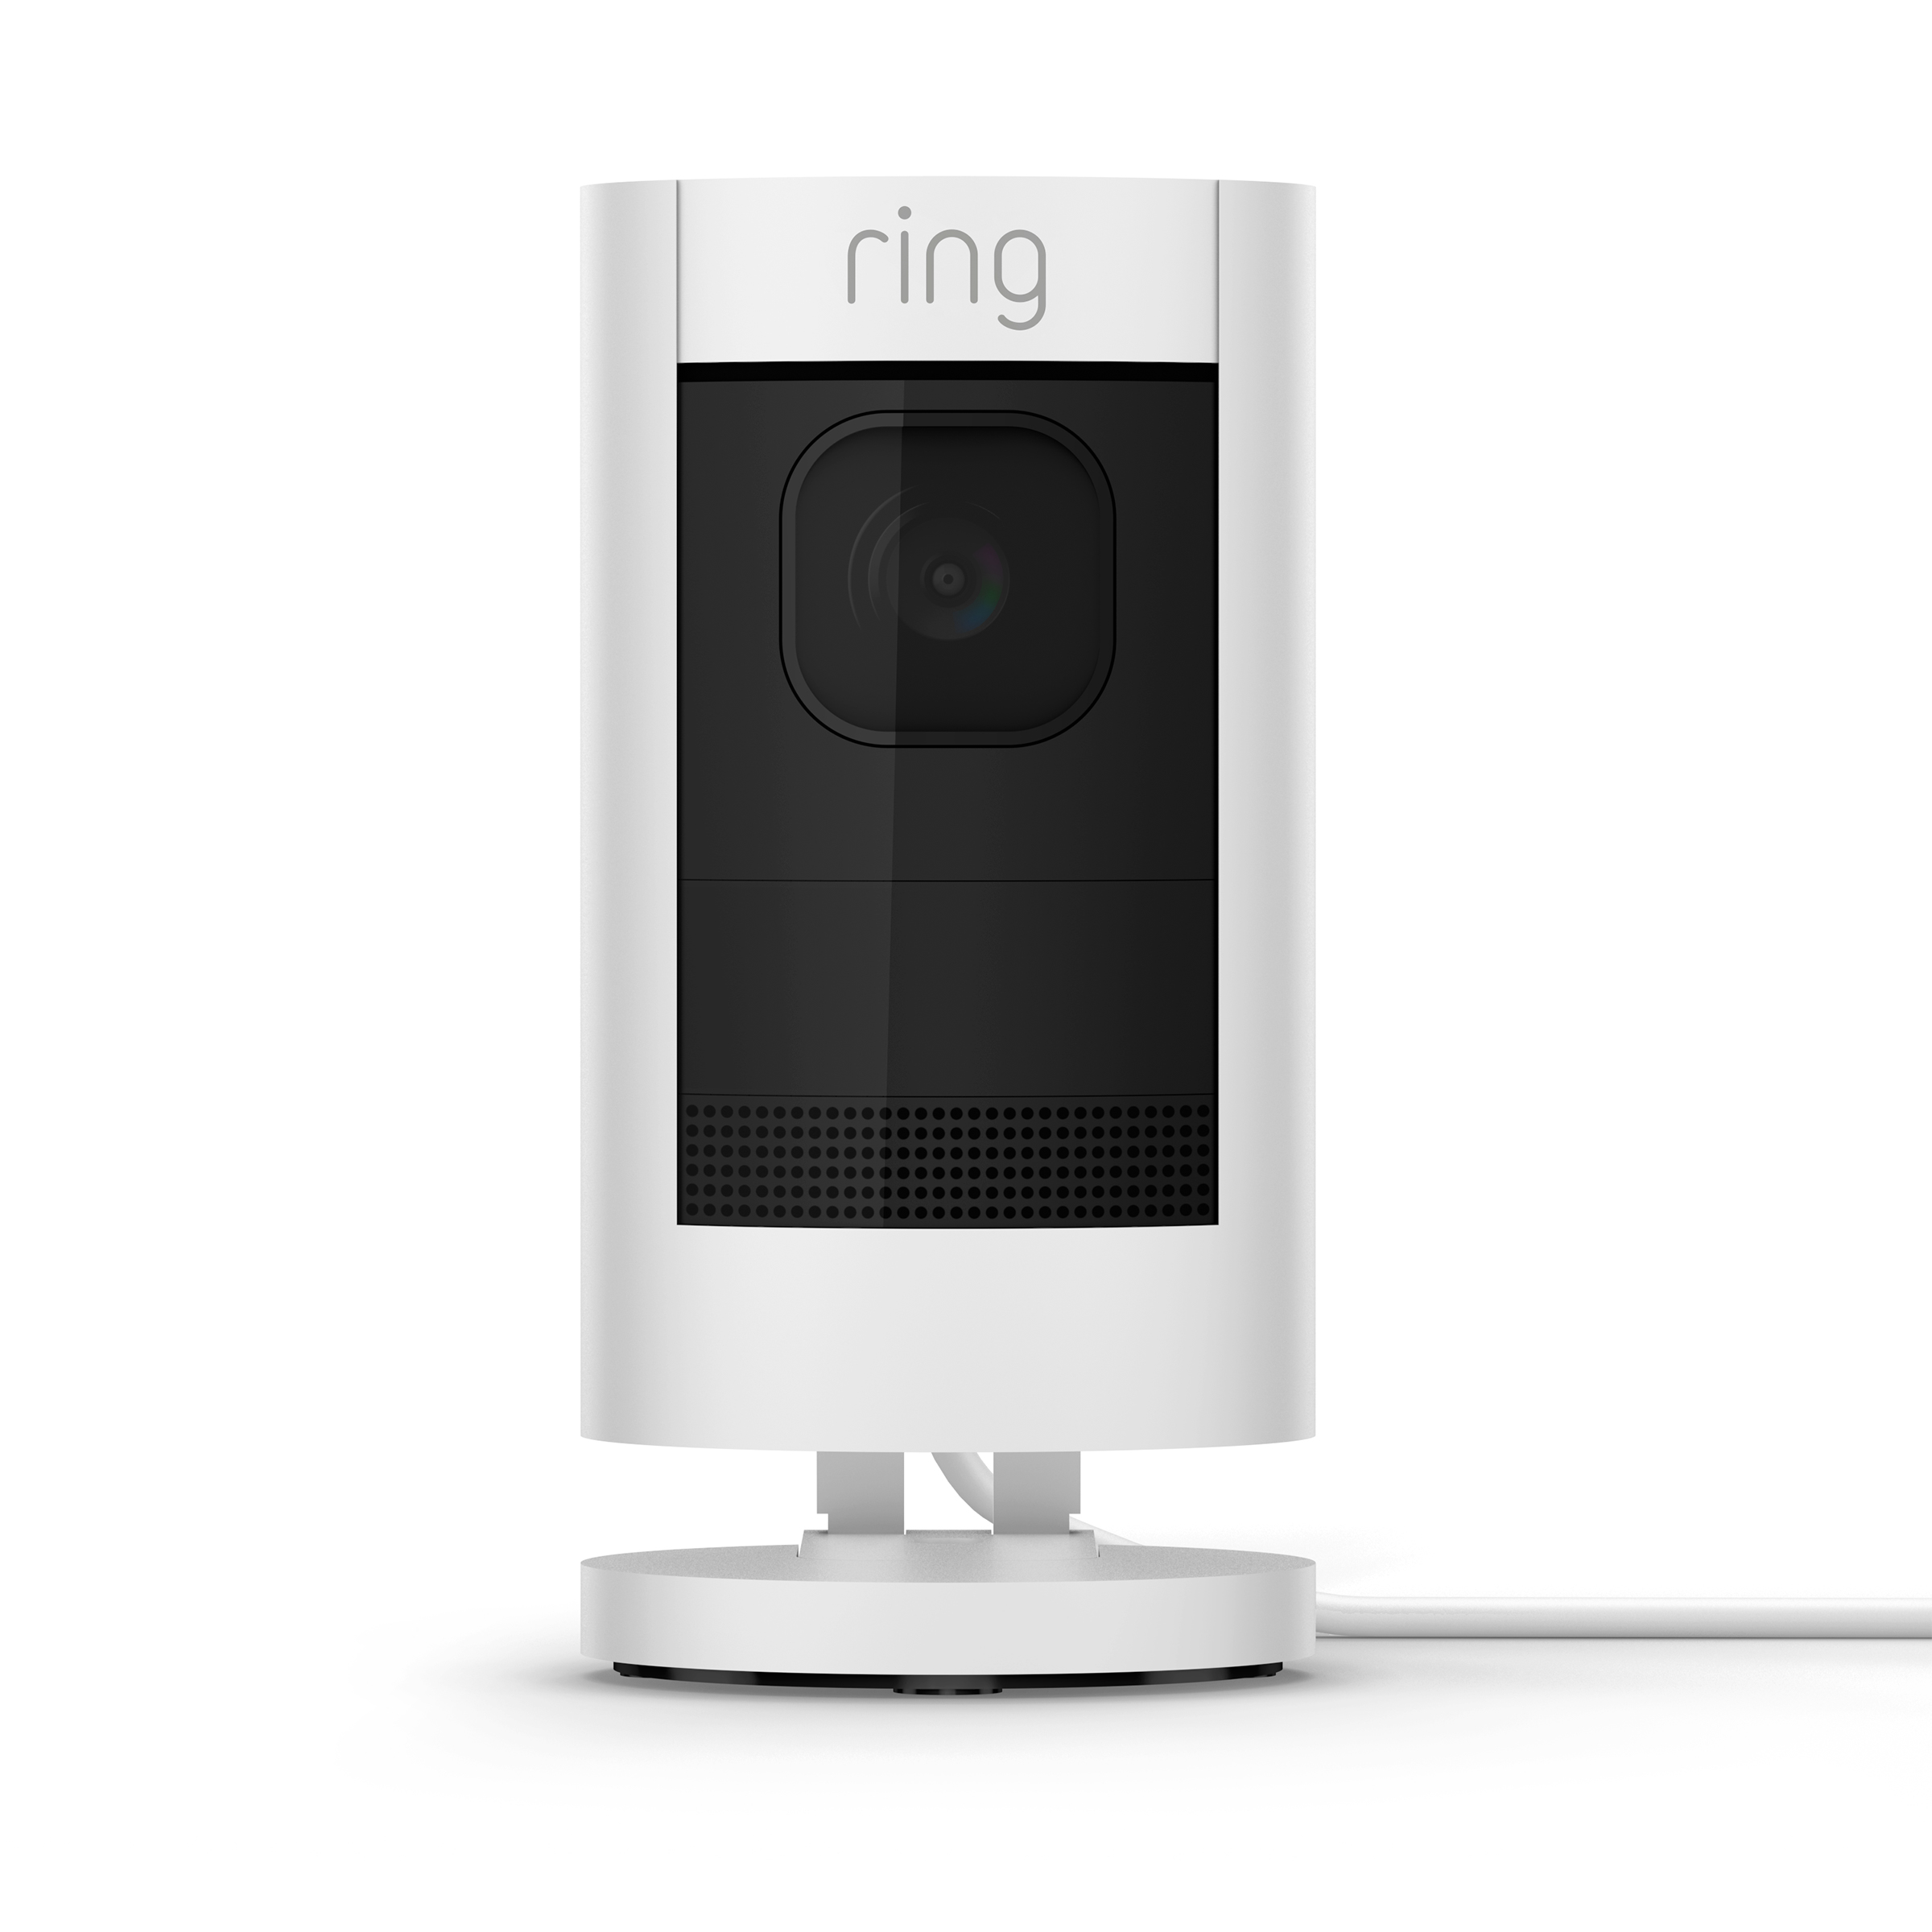 ring wireless security camera